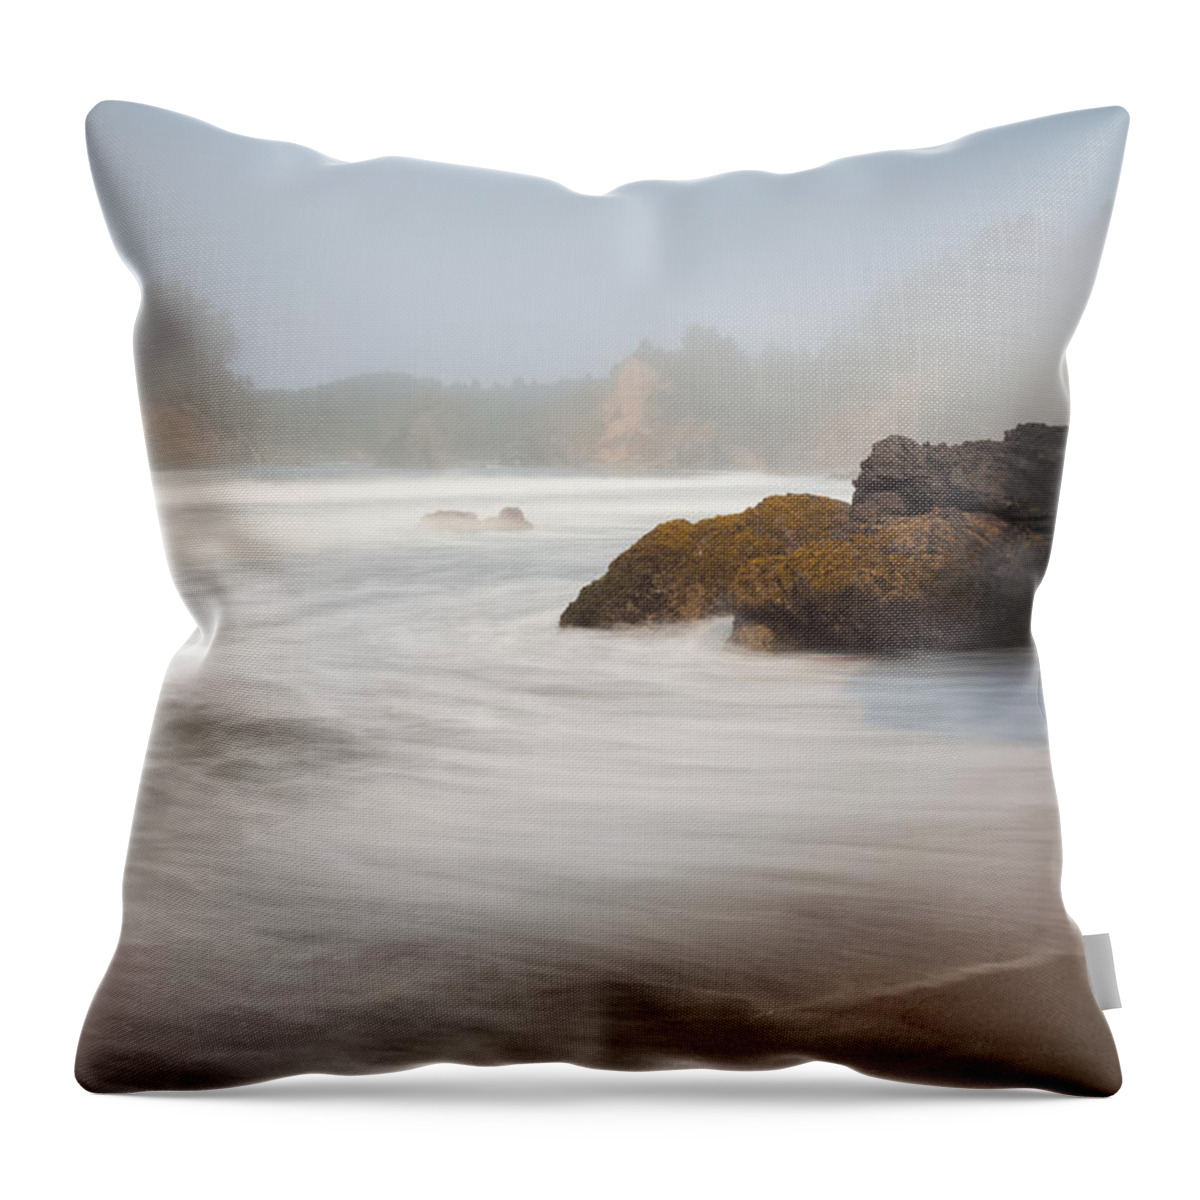 Trinidad Throw Pillow featuring the photograph A Fog Rolls In by Mark Alder